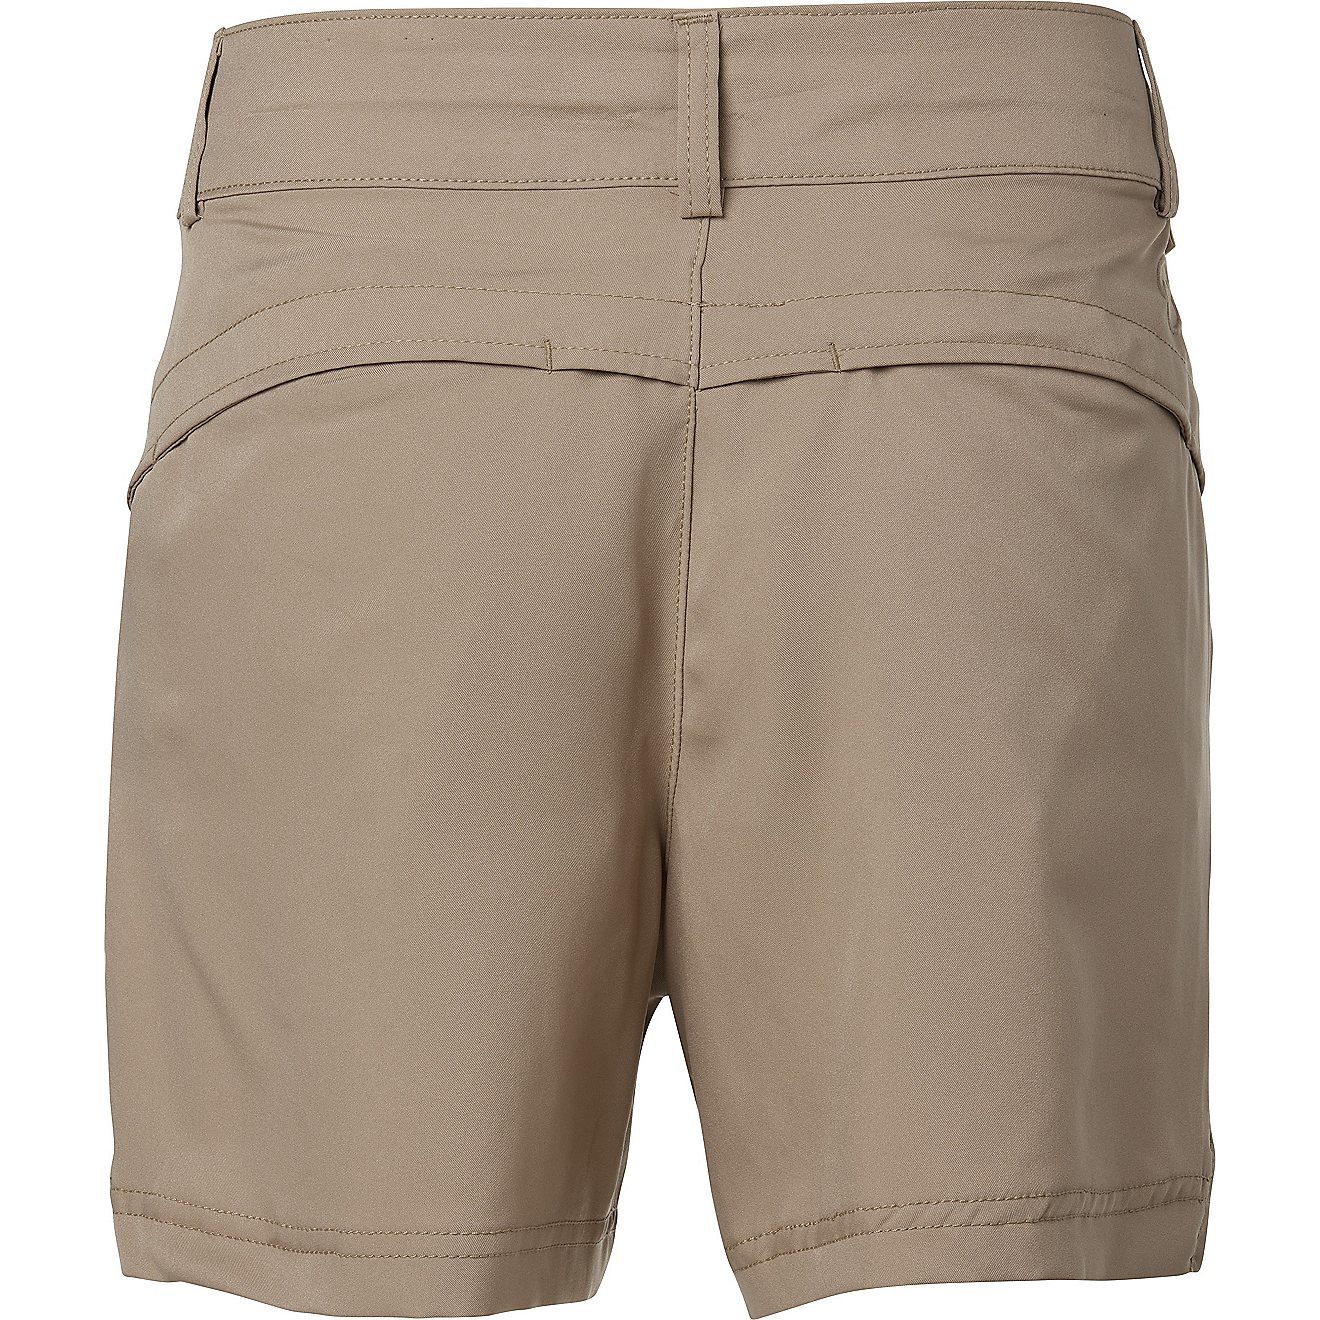 Magellan Outdoors Women's Falcon Lake Shorty Shorts 5 in                                                                         - view number 2